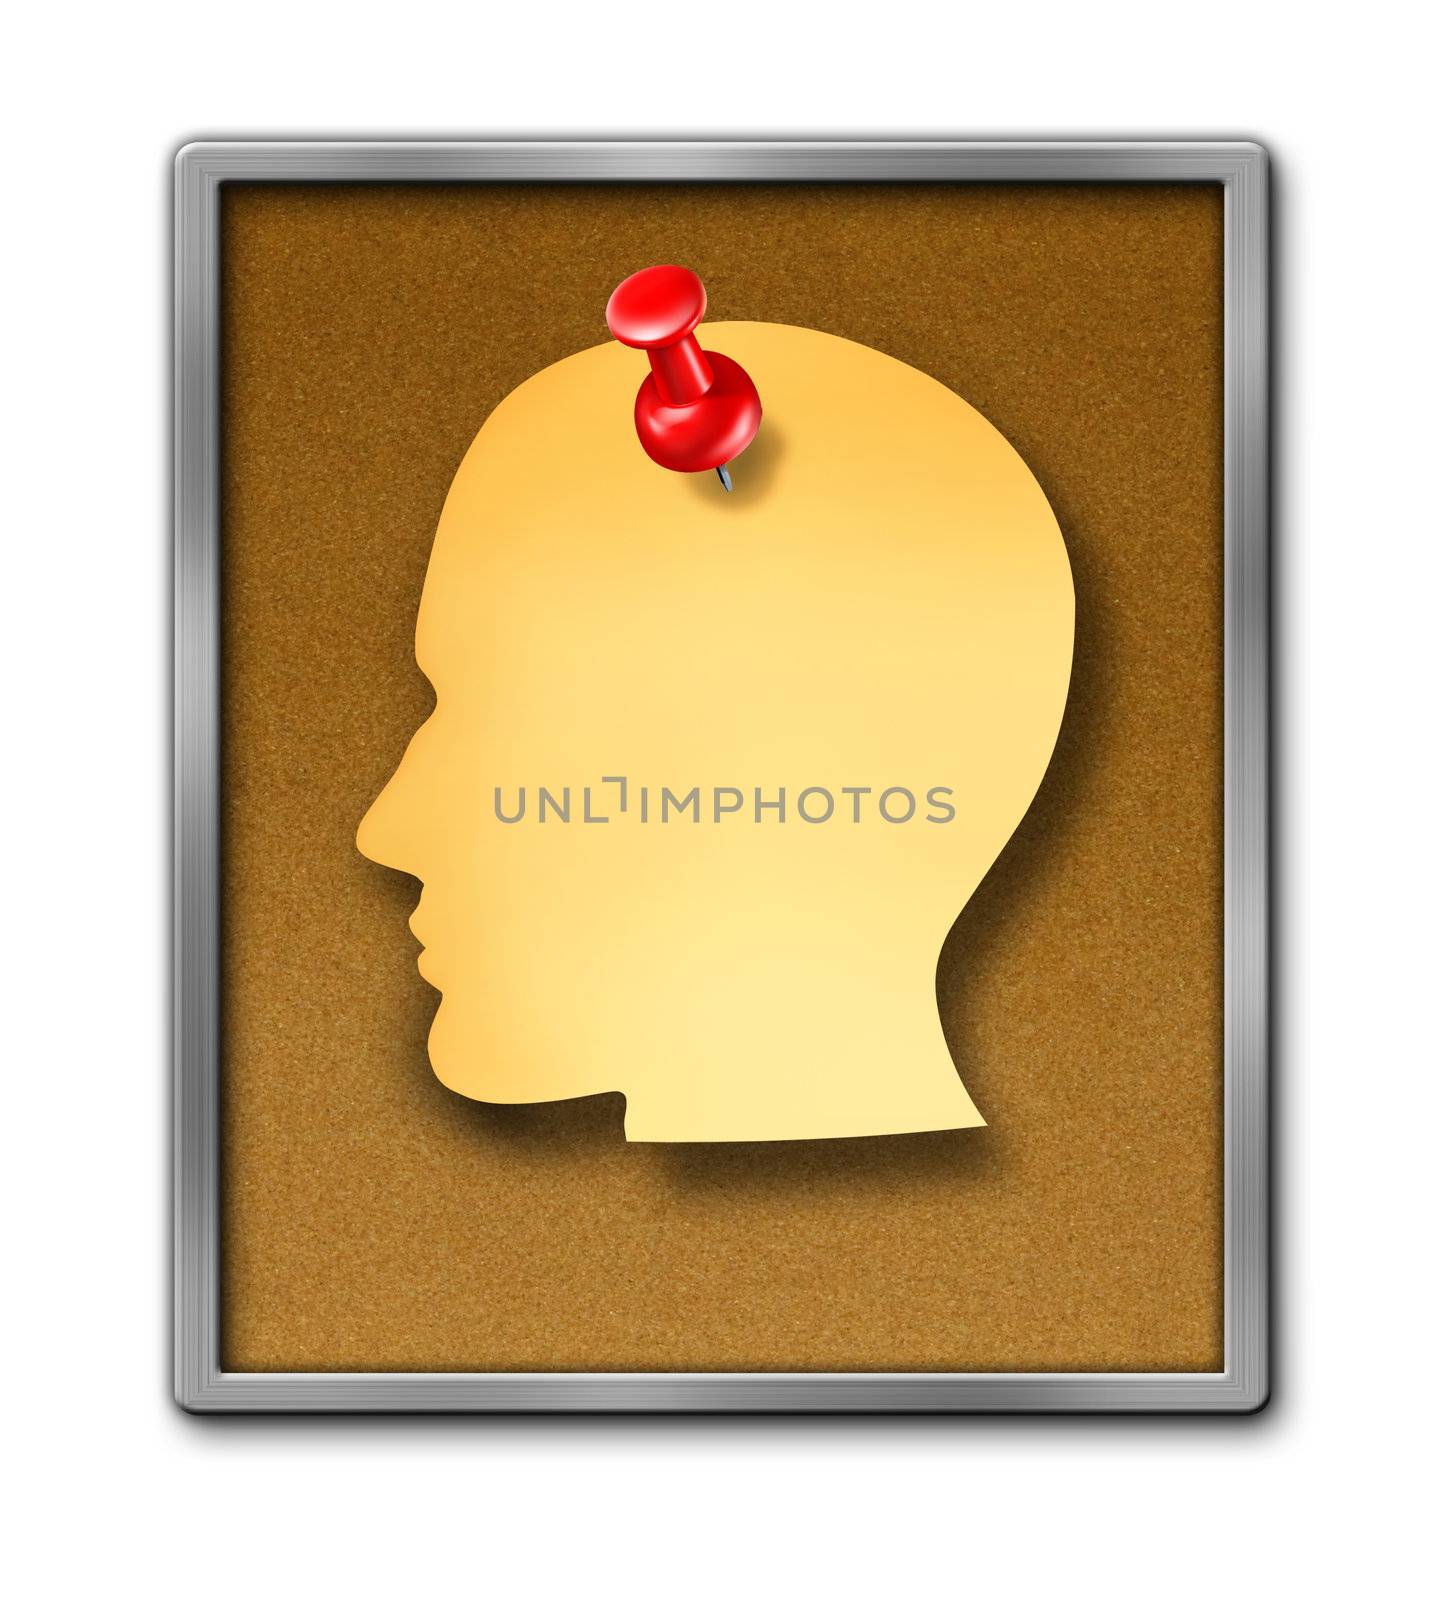 Human paper note reminder in the shape of a head as a blank yellow sheet and a red thumb tack pin on a cork board frame as a health care dementia symbol of memories and a business schedule reminder.